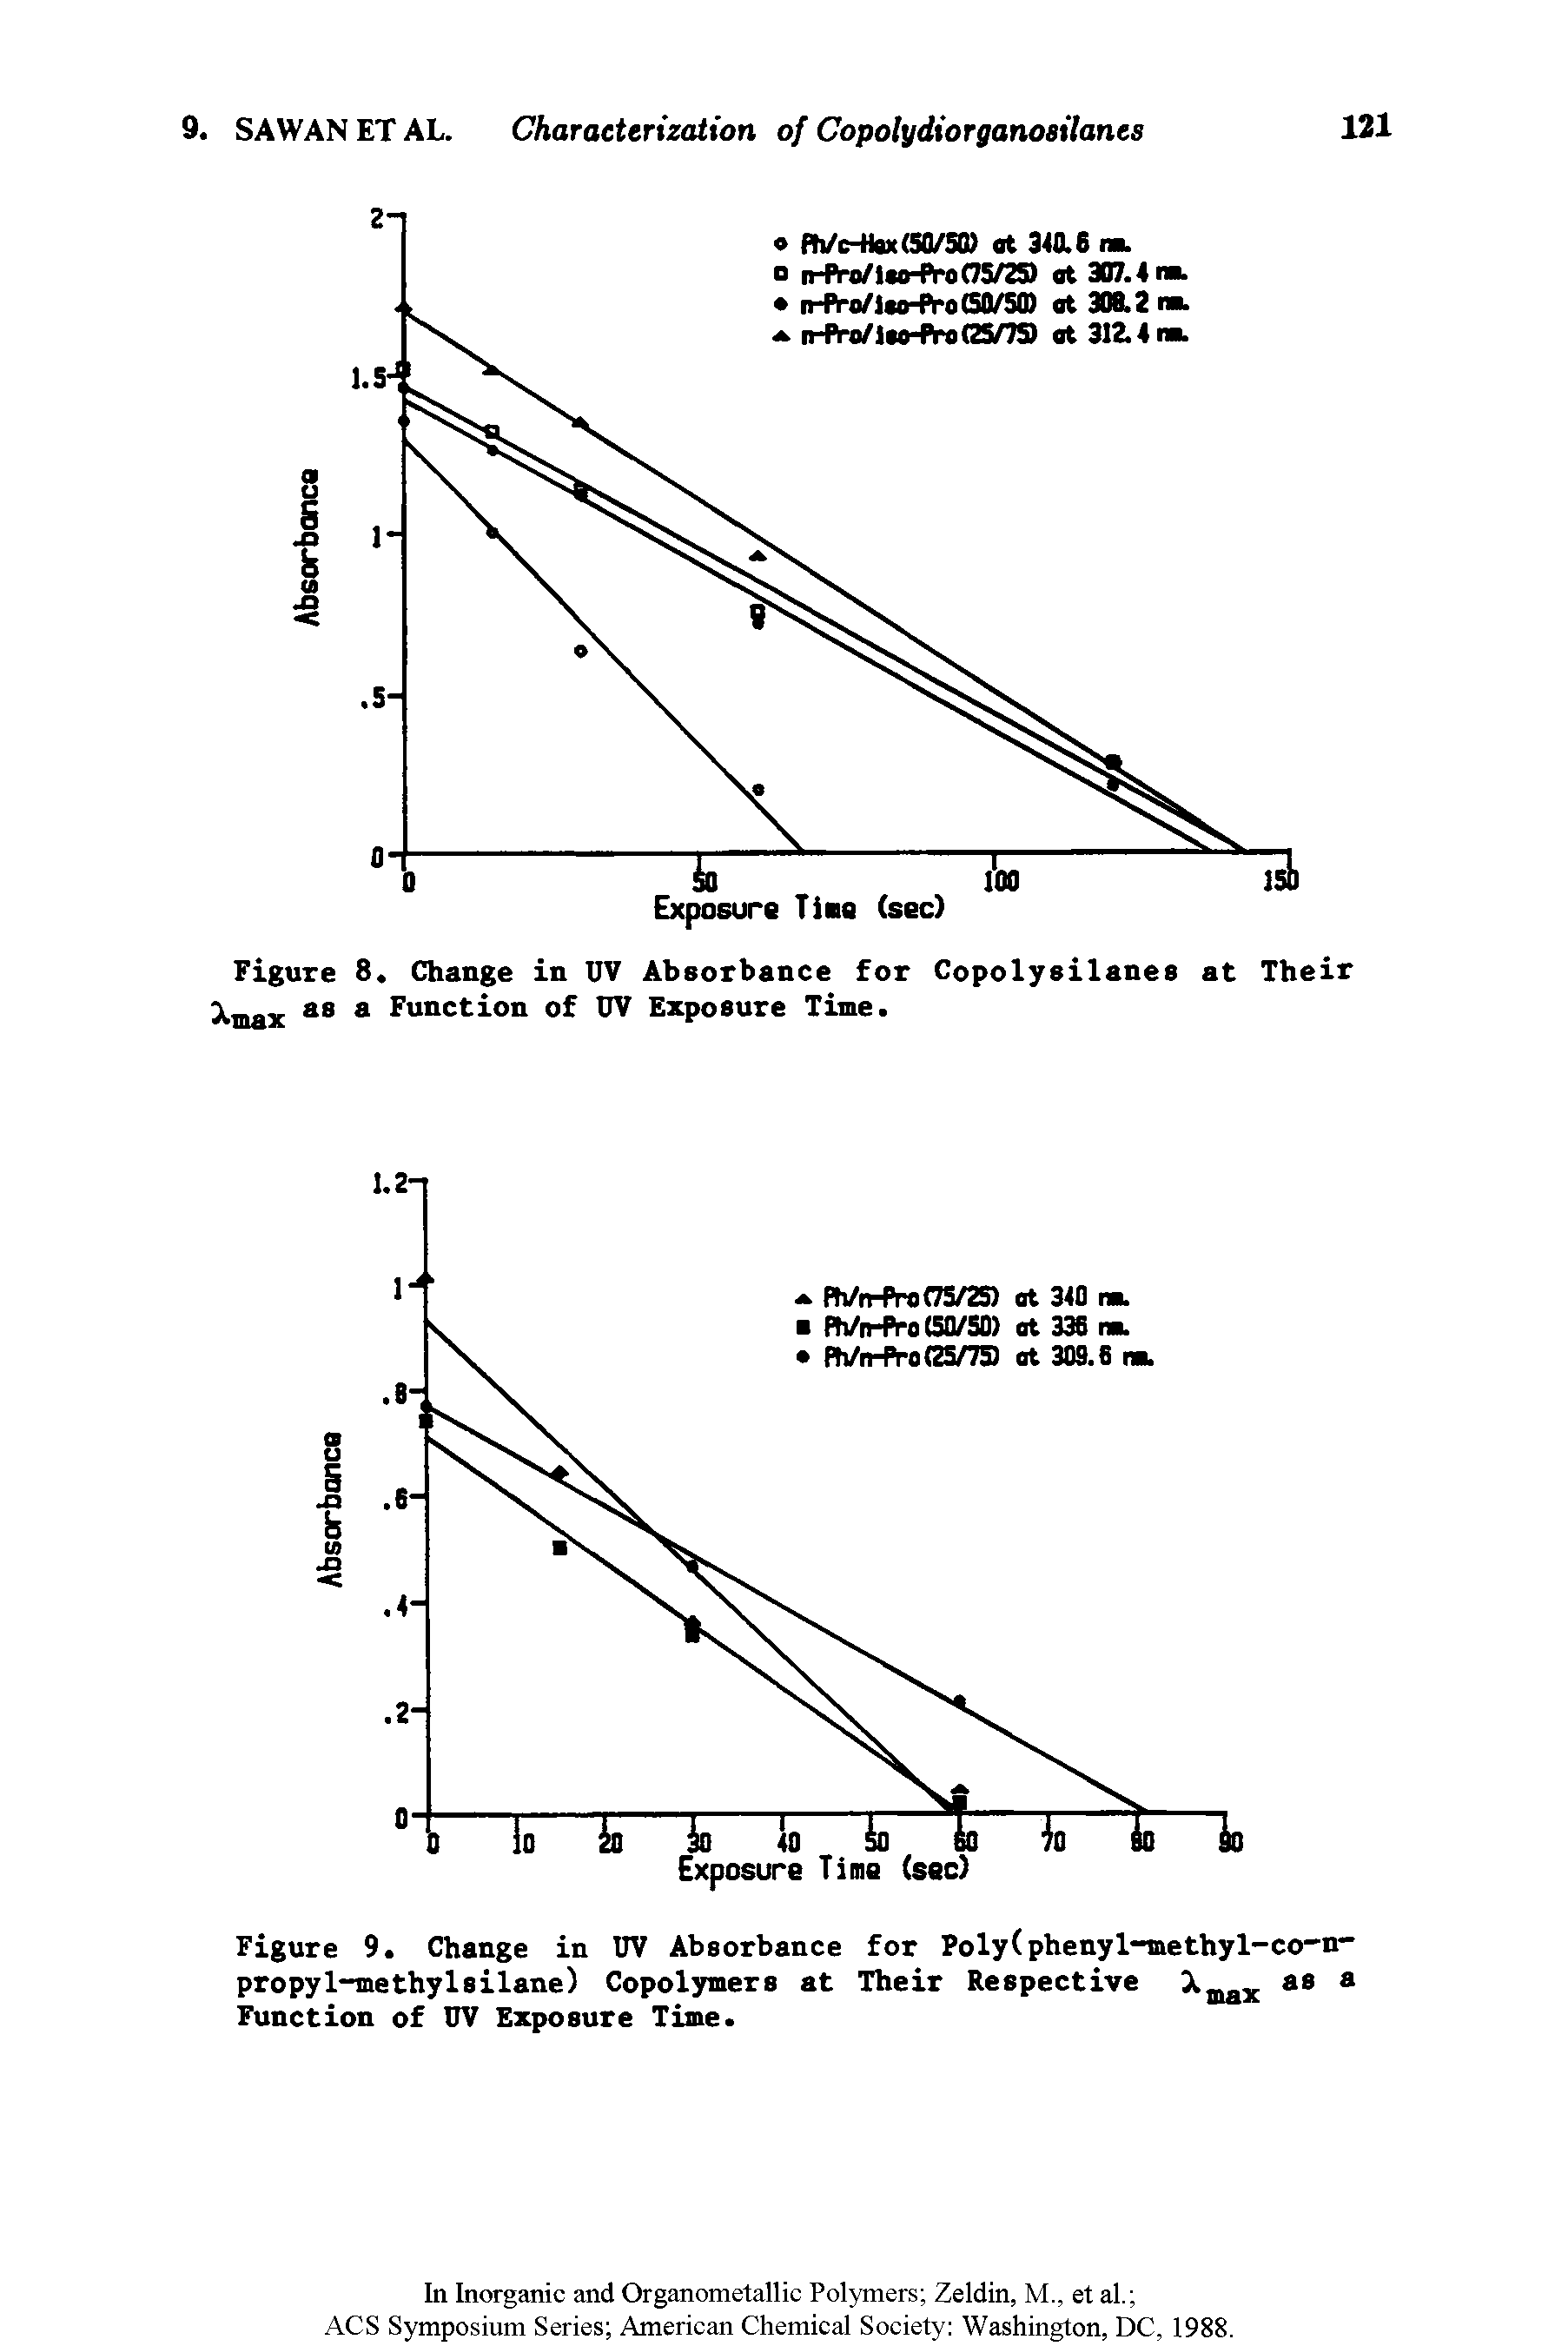 Figure 9. Change in UV Absorbance for Poly(phenyl-methyl-co-n-propyl-methylsilane) Copolymers at Their Respective 1MX as a Function of UV Exposure Time.